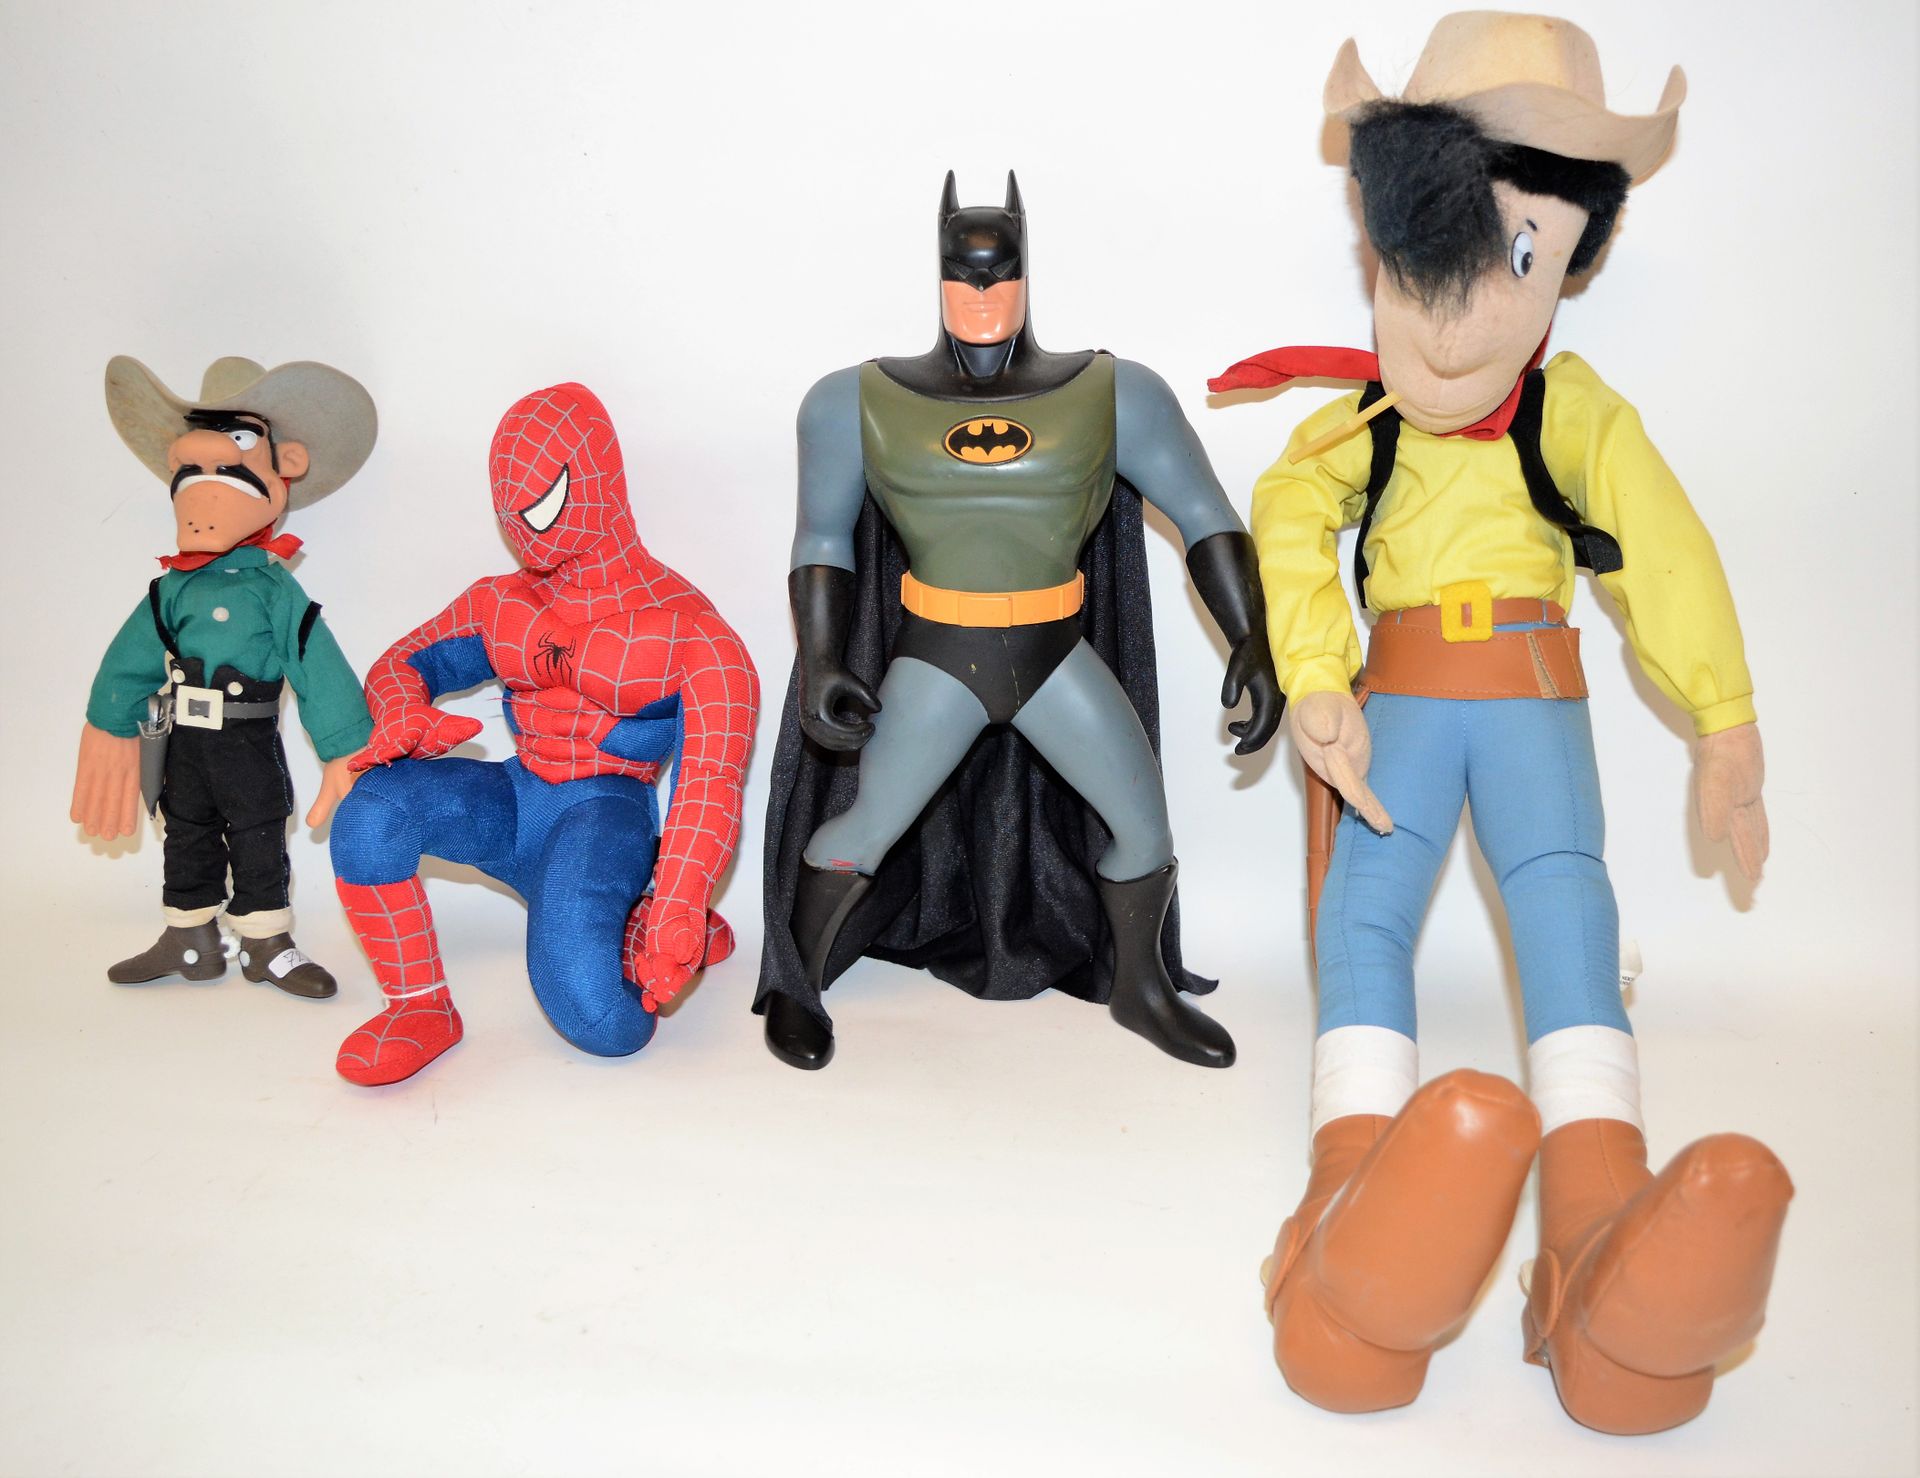 Null Set of 4 Marvel/BD characters

- Spiderman Play by Play plush, 30 cm

-Batm&hellip;